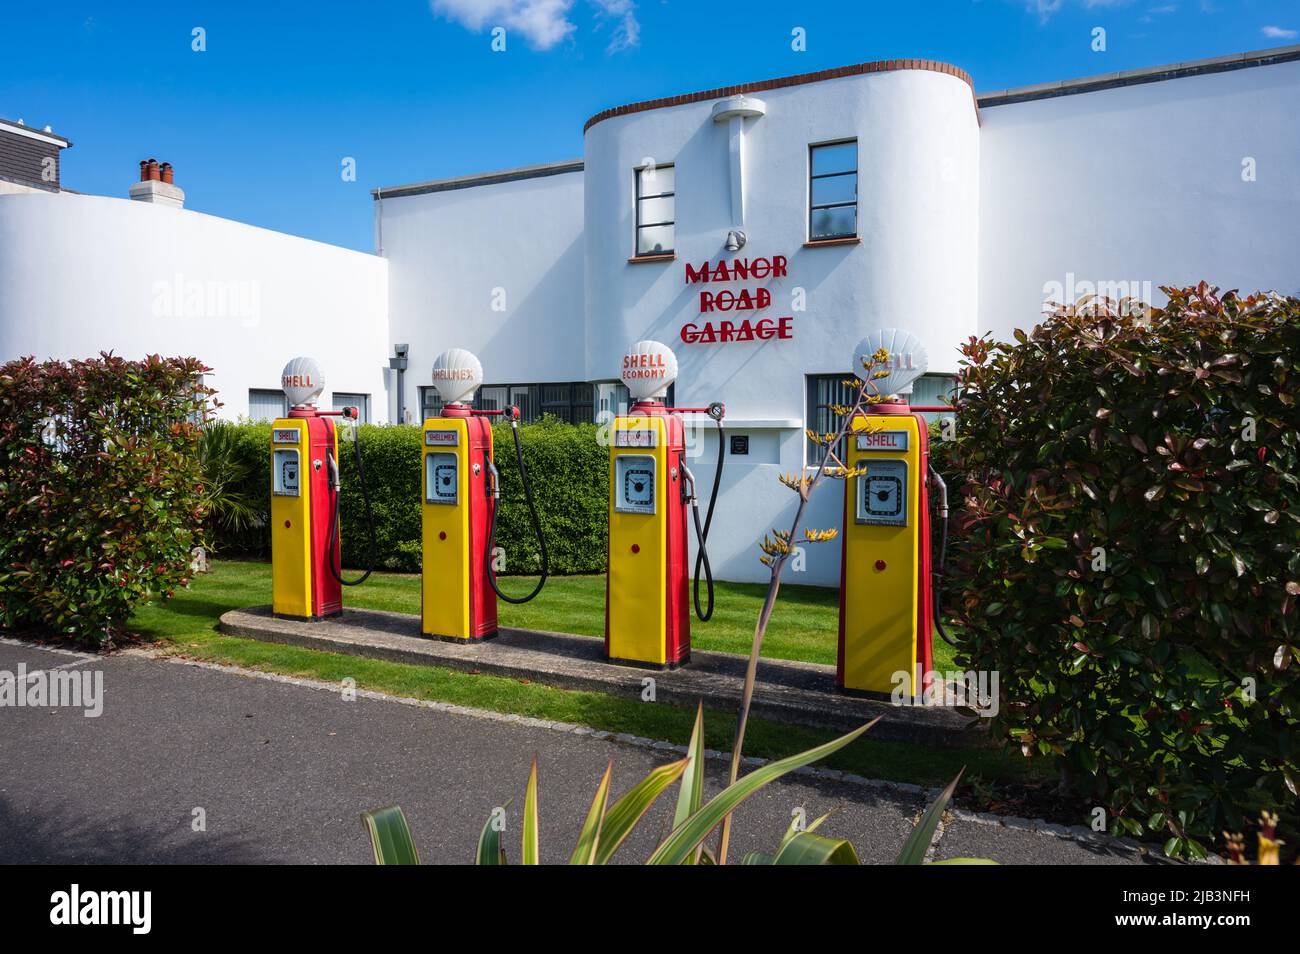 Manor Road Garage, Art Deco style apartments converted from restored 1930s petrol or fuel station with vintage fuel pumps in East Preston, England, UK Stock Photo